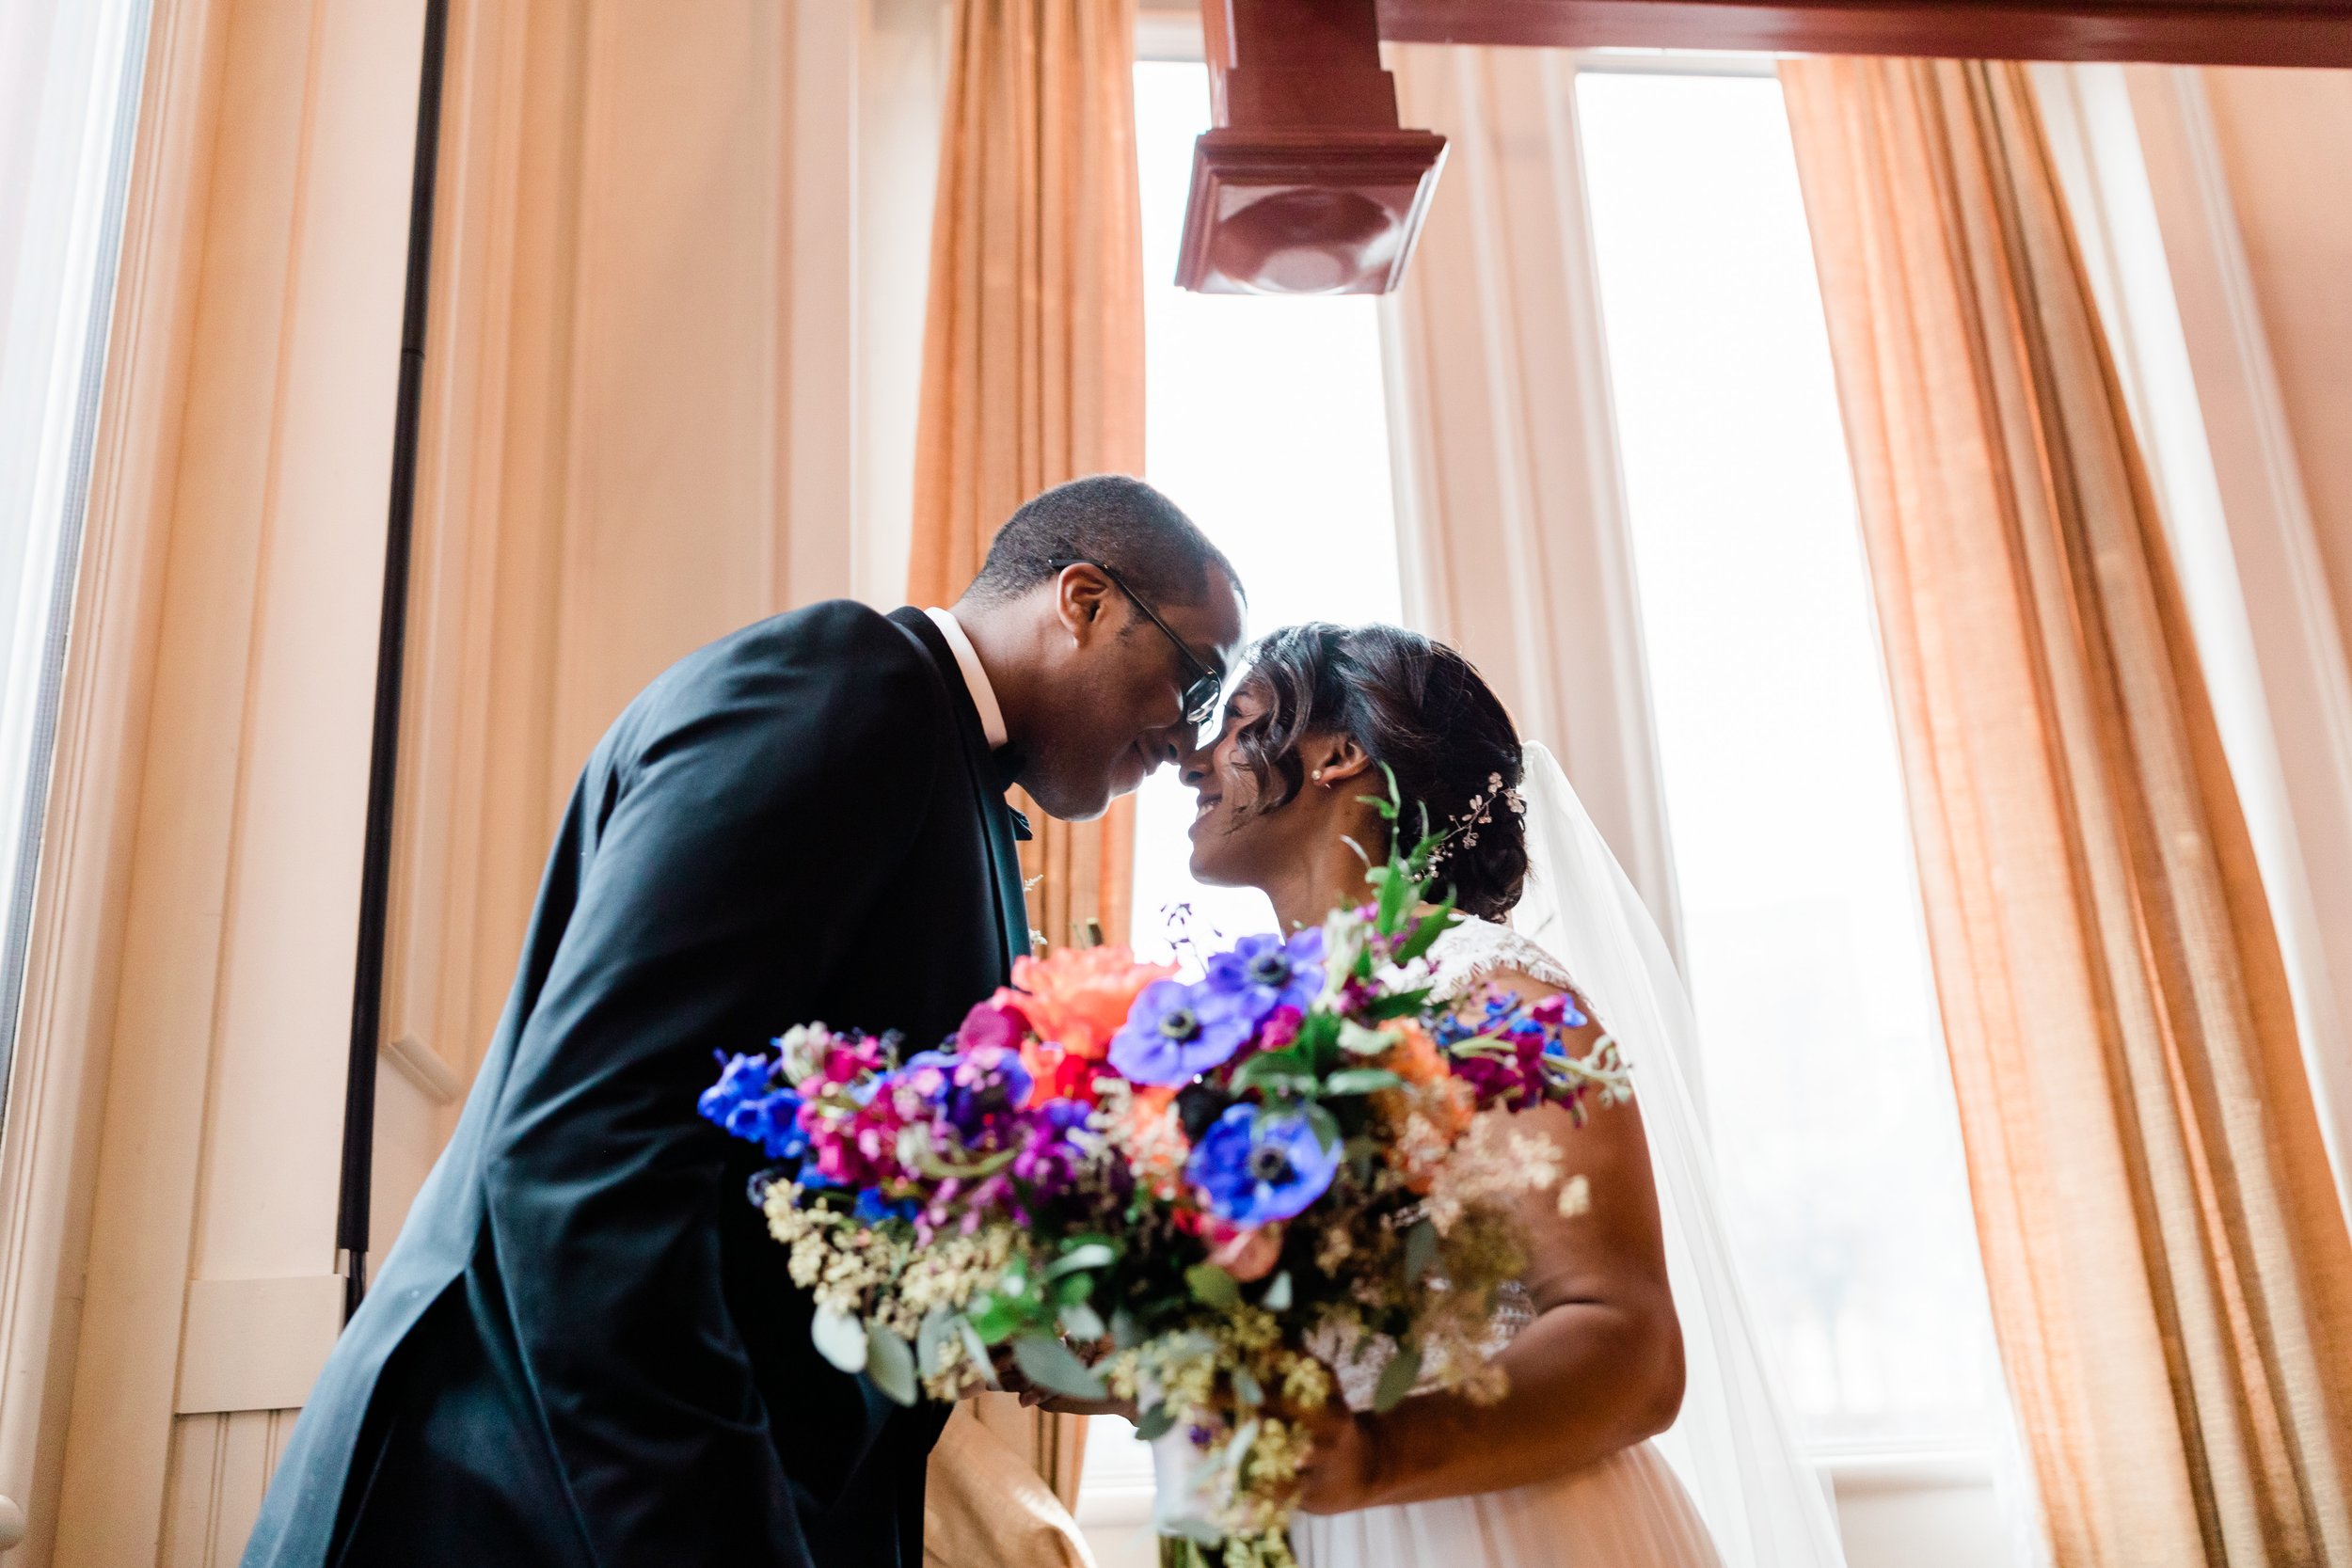 Snowy Winter Wedding at 1840's Plaza in Baltimore City Megapixels Media Photography-17.jpg